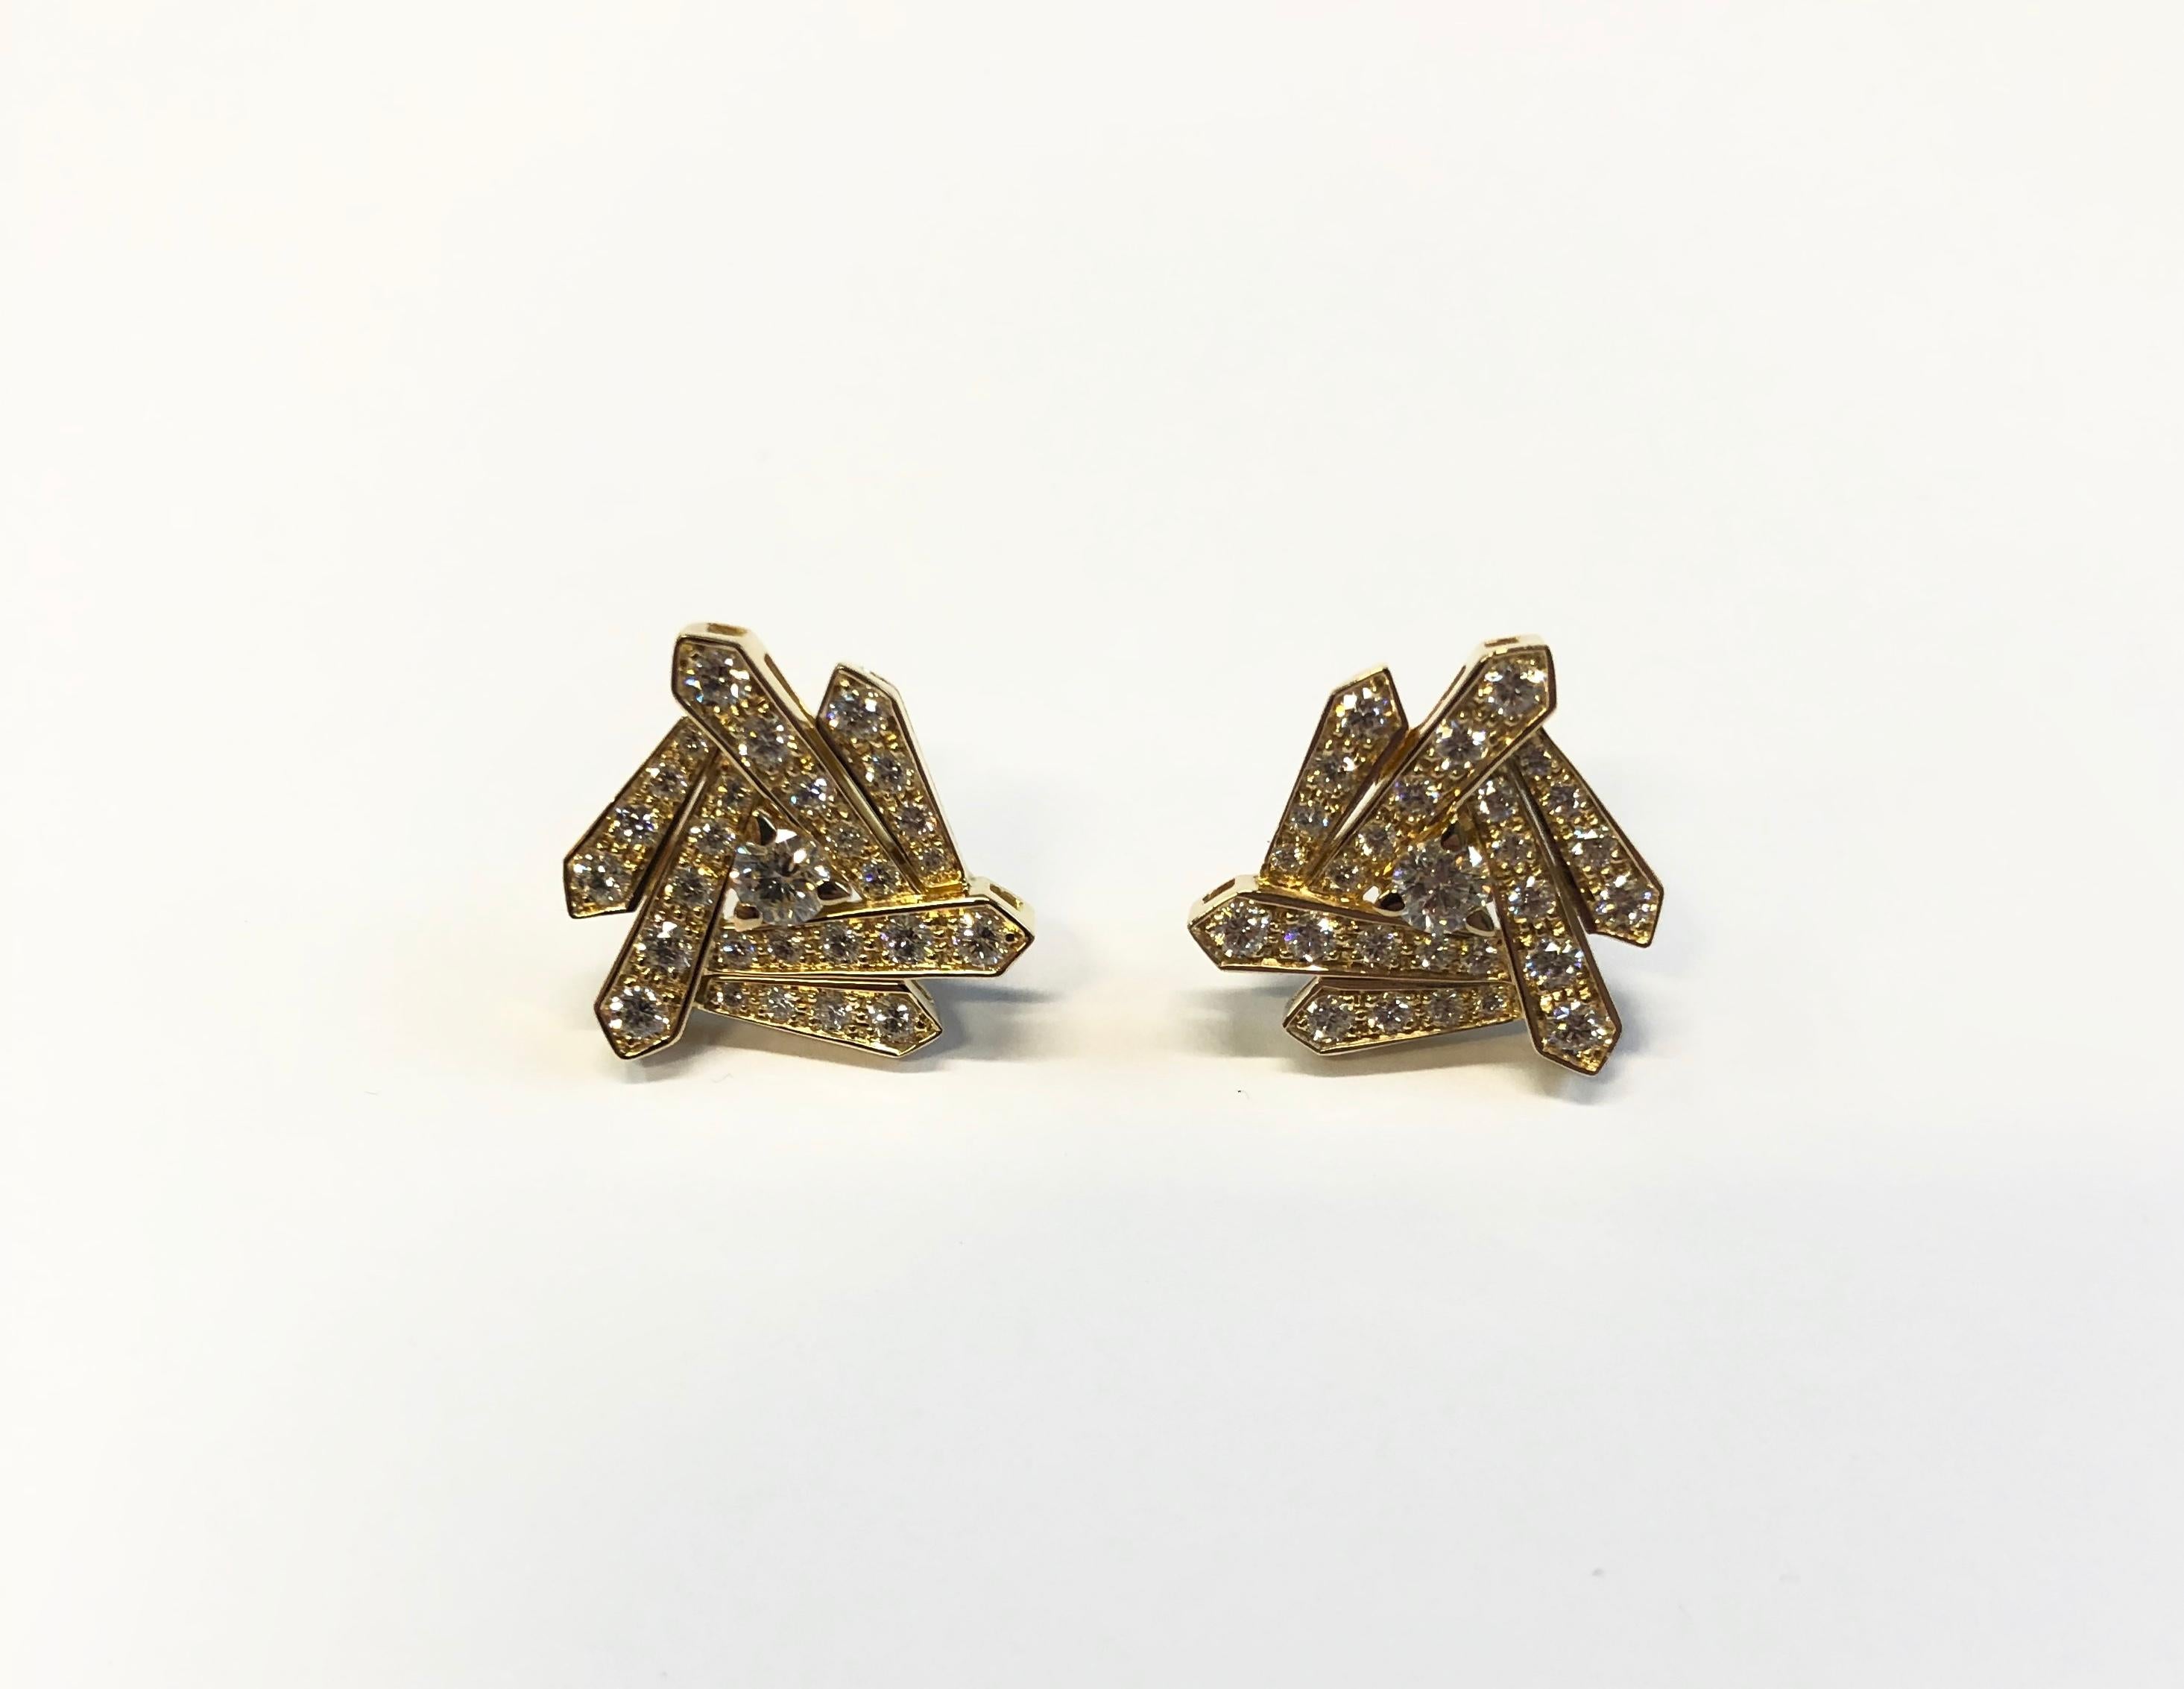 18 Carat Yellow Gold Round Cut Diamonds Stud Earrings featuring 1.30 carats, color G, clarity VVS1; total piece weight 8.30 gr
Handmade in Italy 
Ready in stock

Art Deco Collection
The shapes and the spirit of the American Art Deco From the first